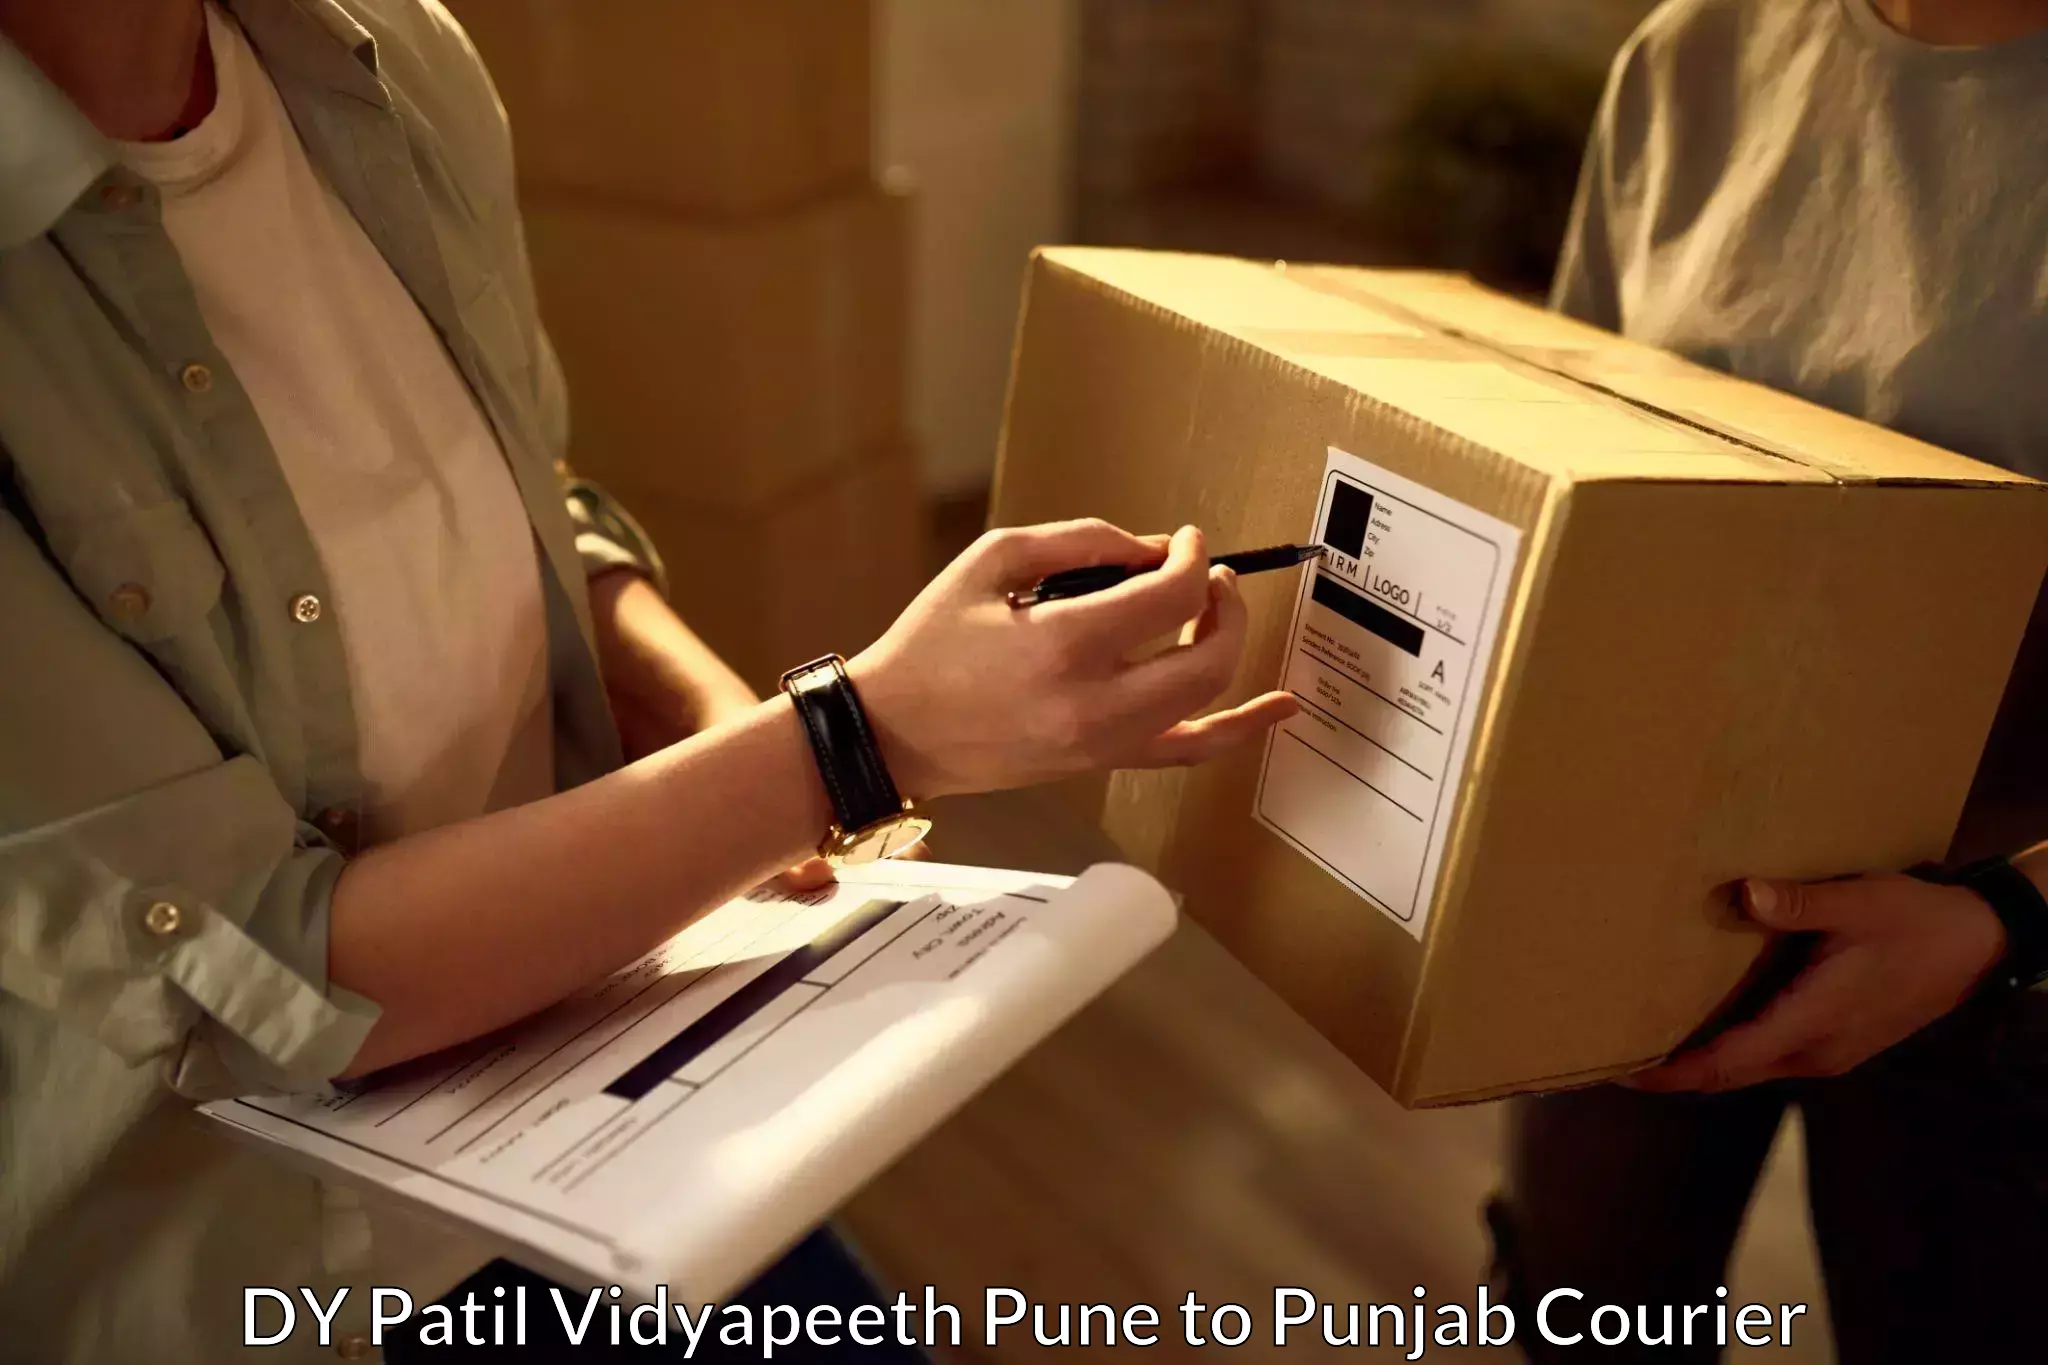 Quick courier services DY Patil Vidyapeeth Pune to Rajpura